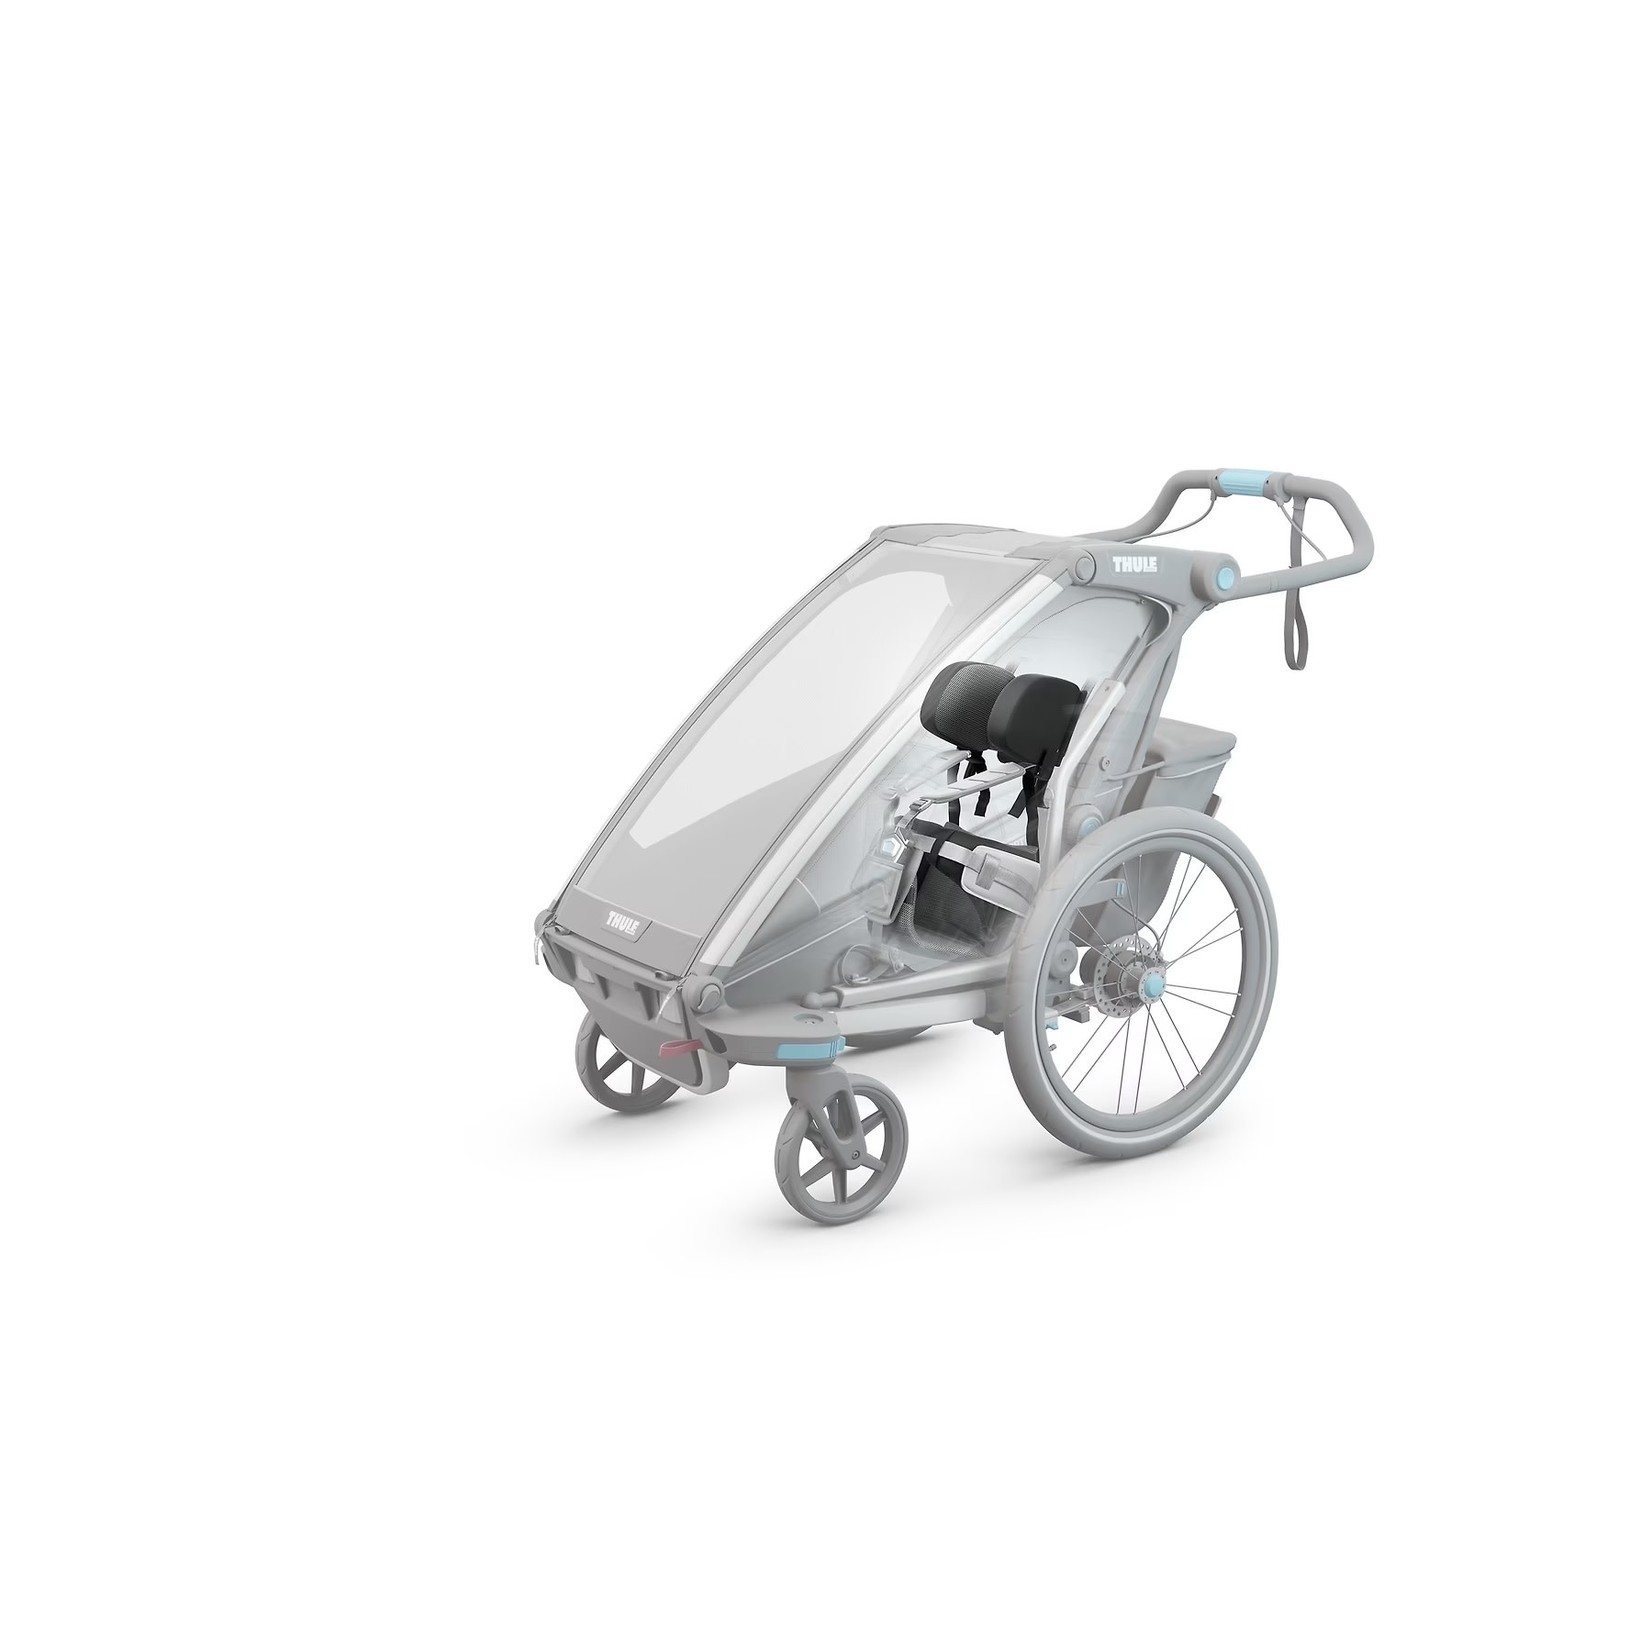 Thule Thule Trailer Baby Supporter 20201517 - Gray